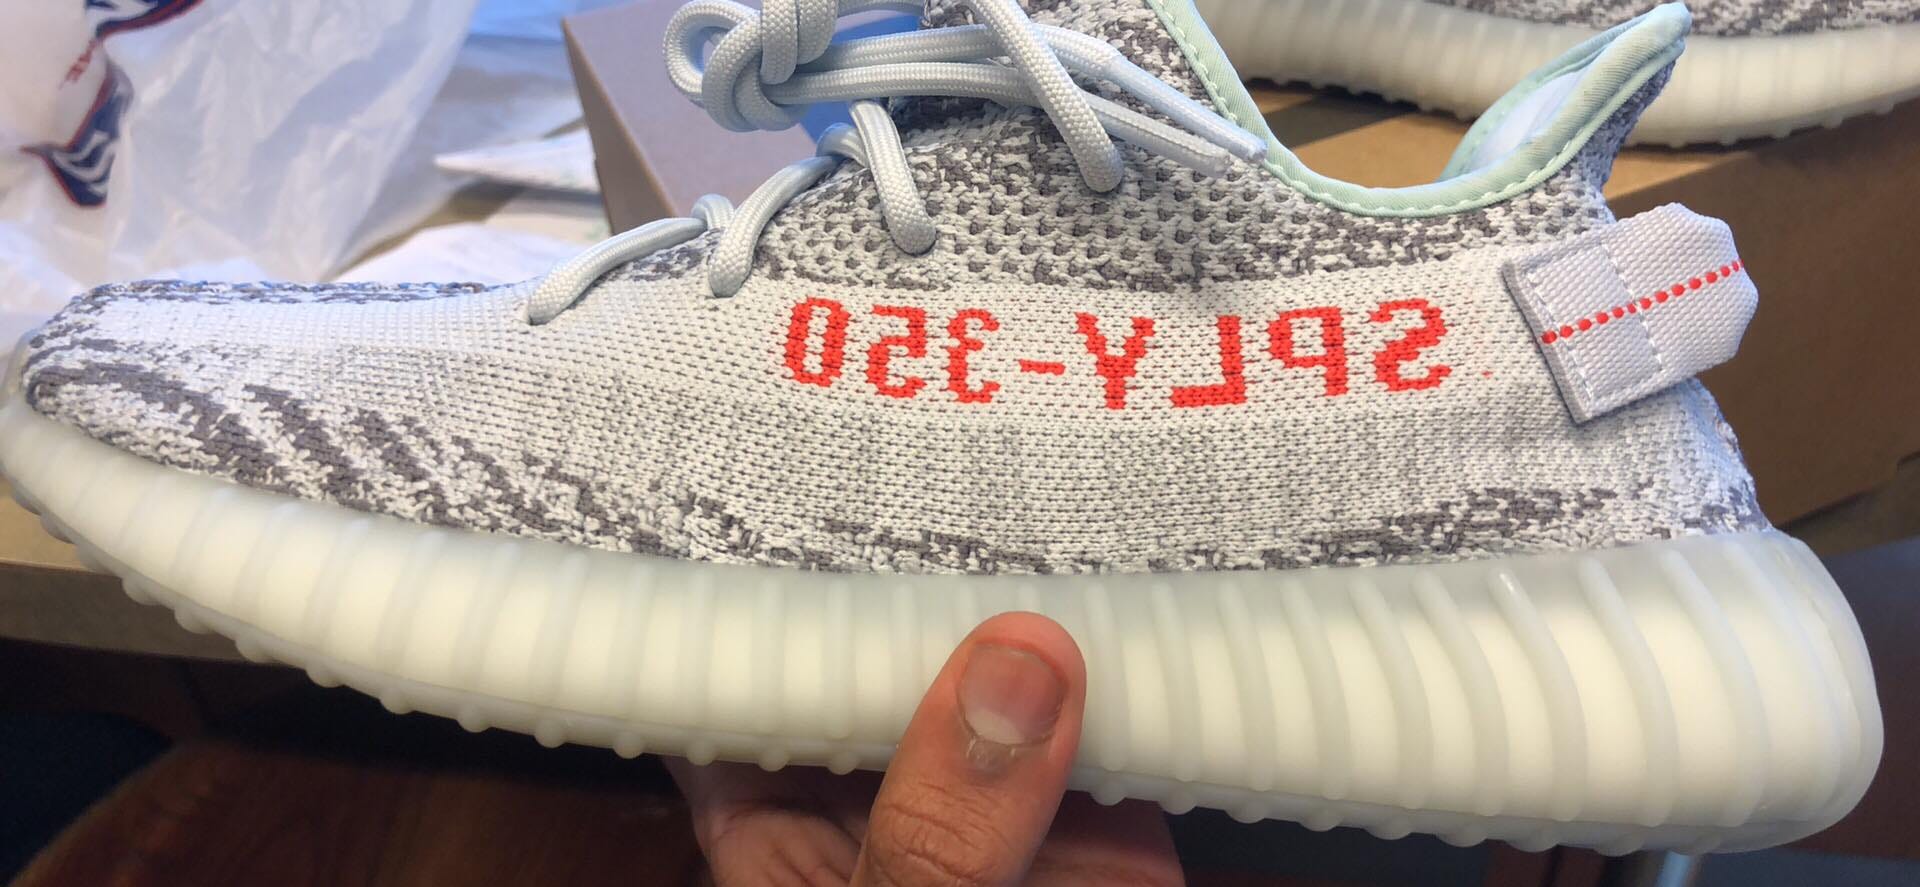 authentic yeezy shoes